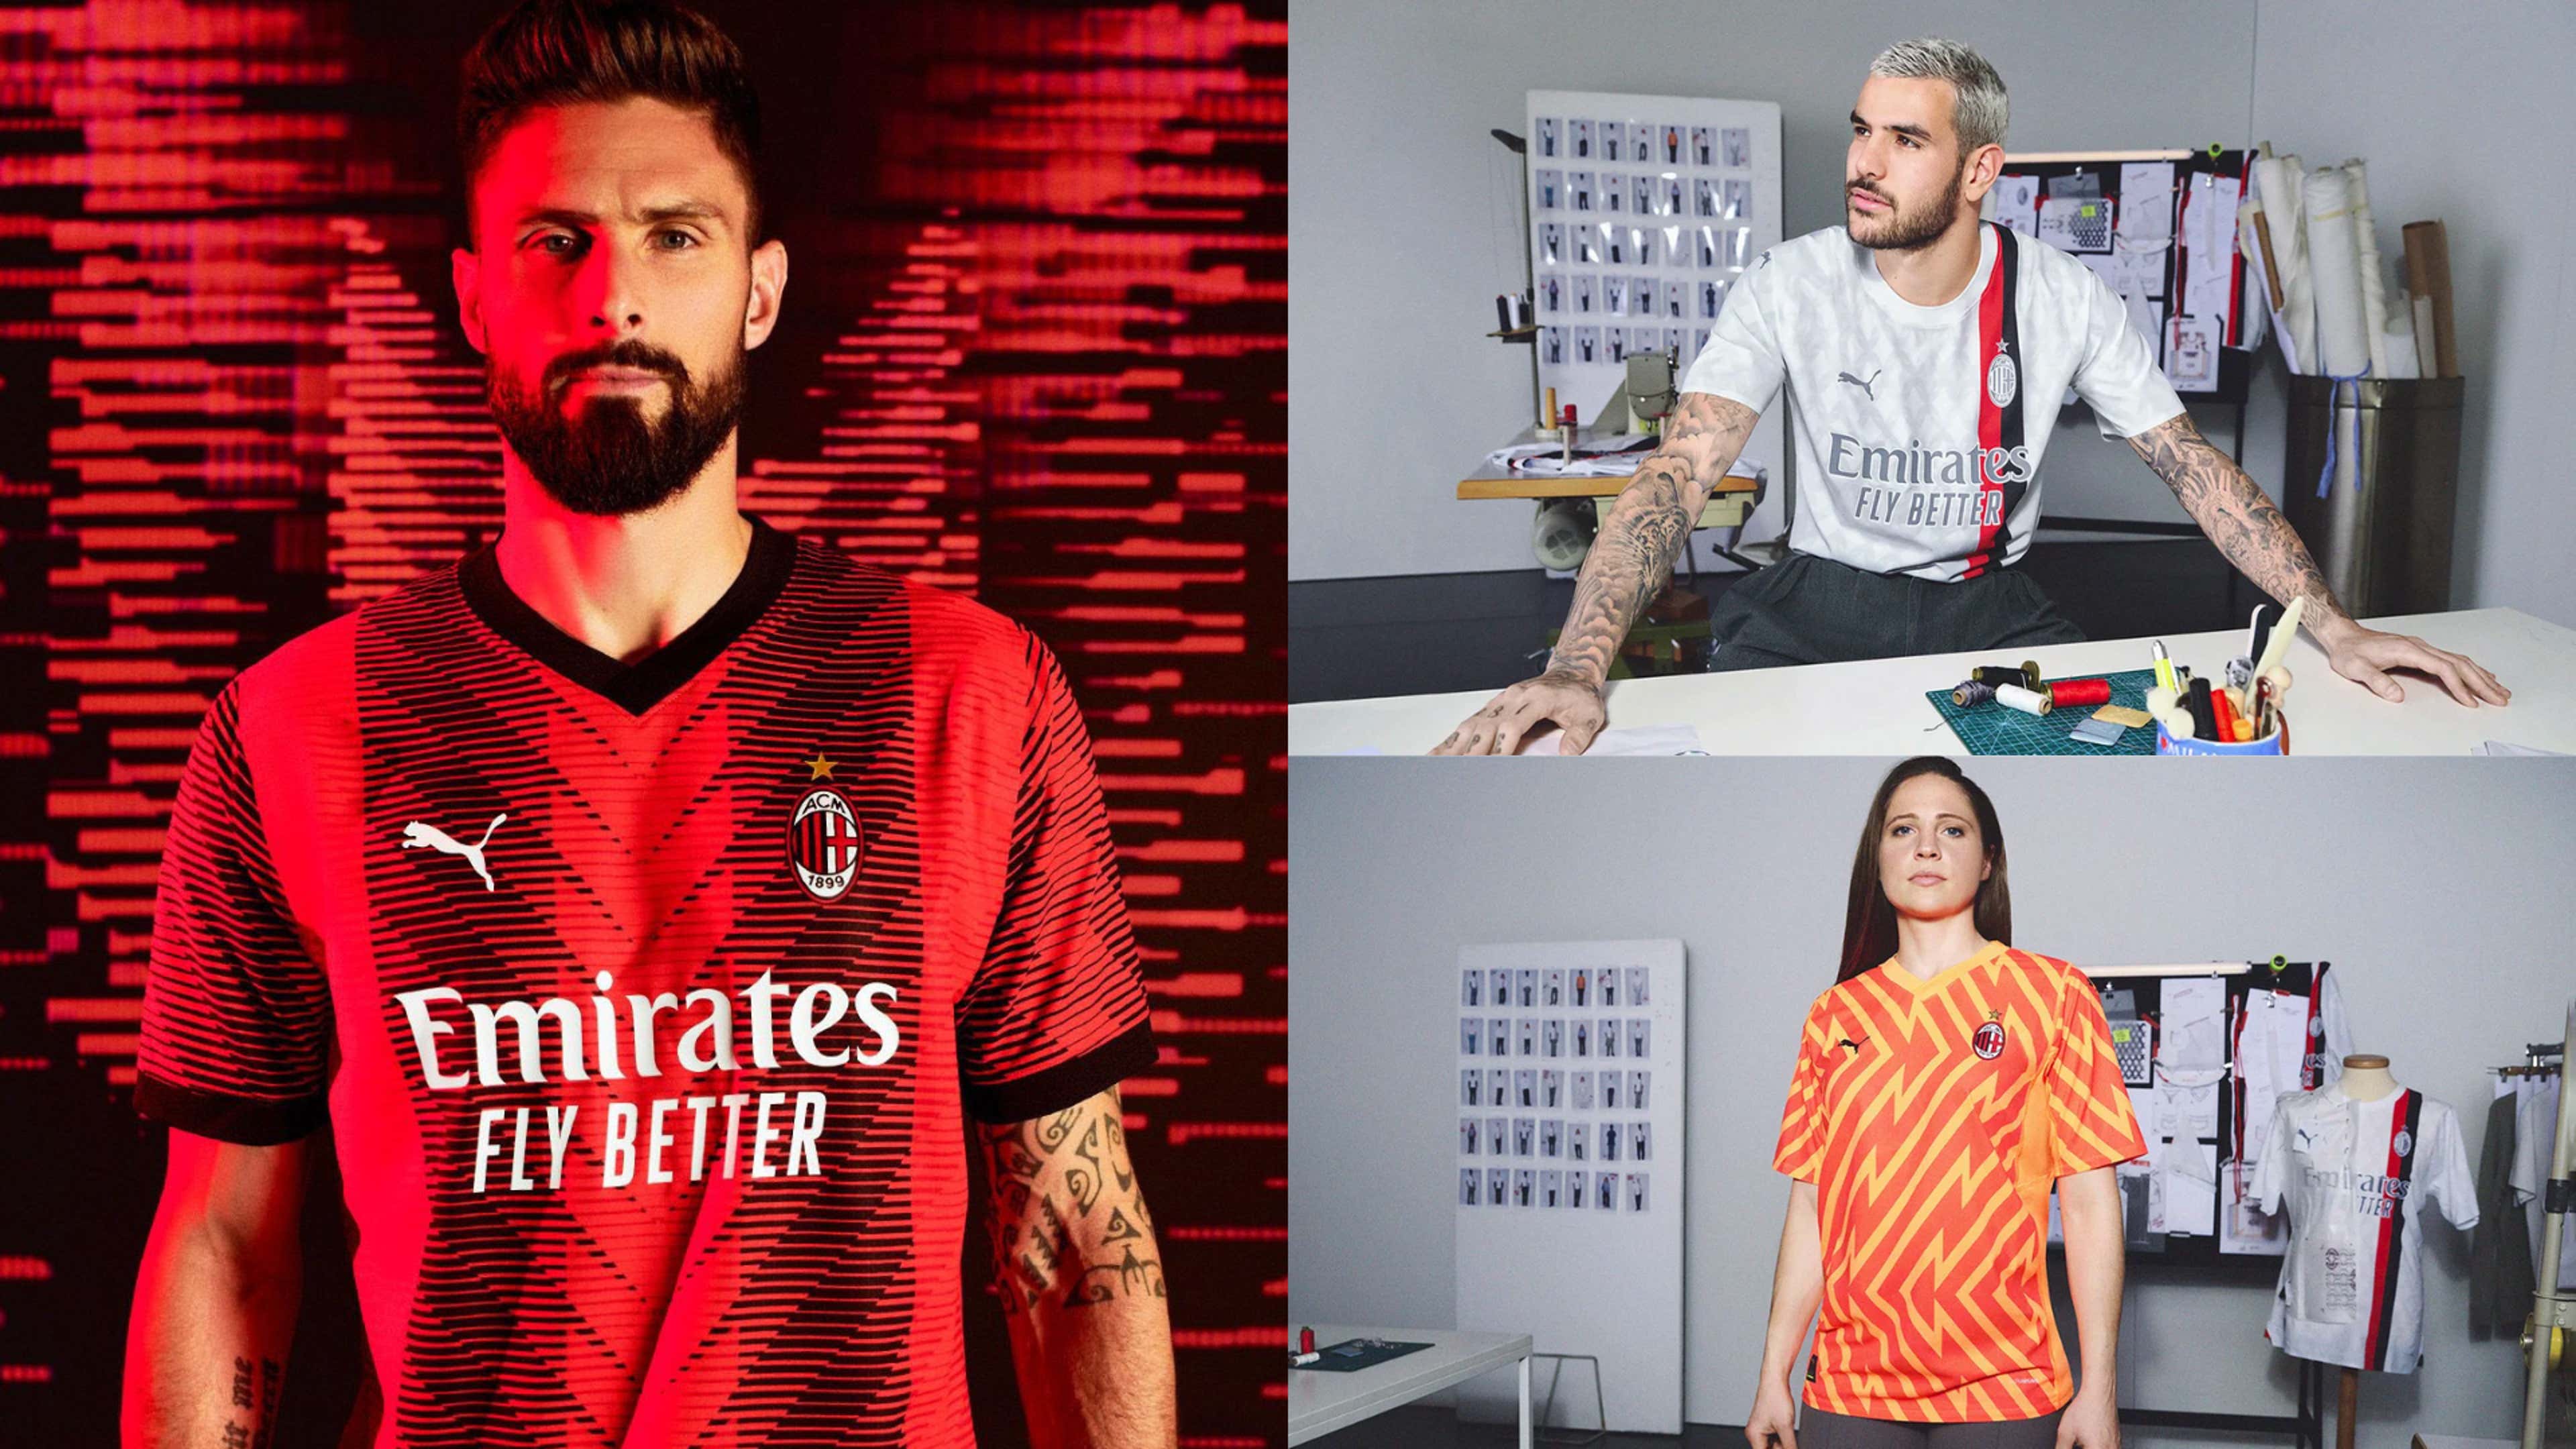 2020/21 Home & Away Kit, Pre-Order now!